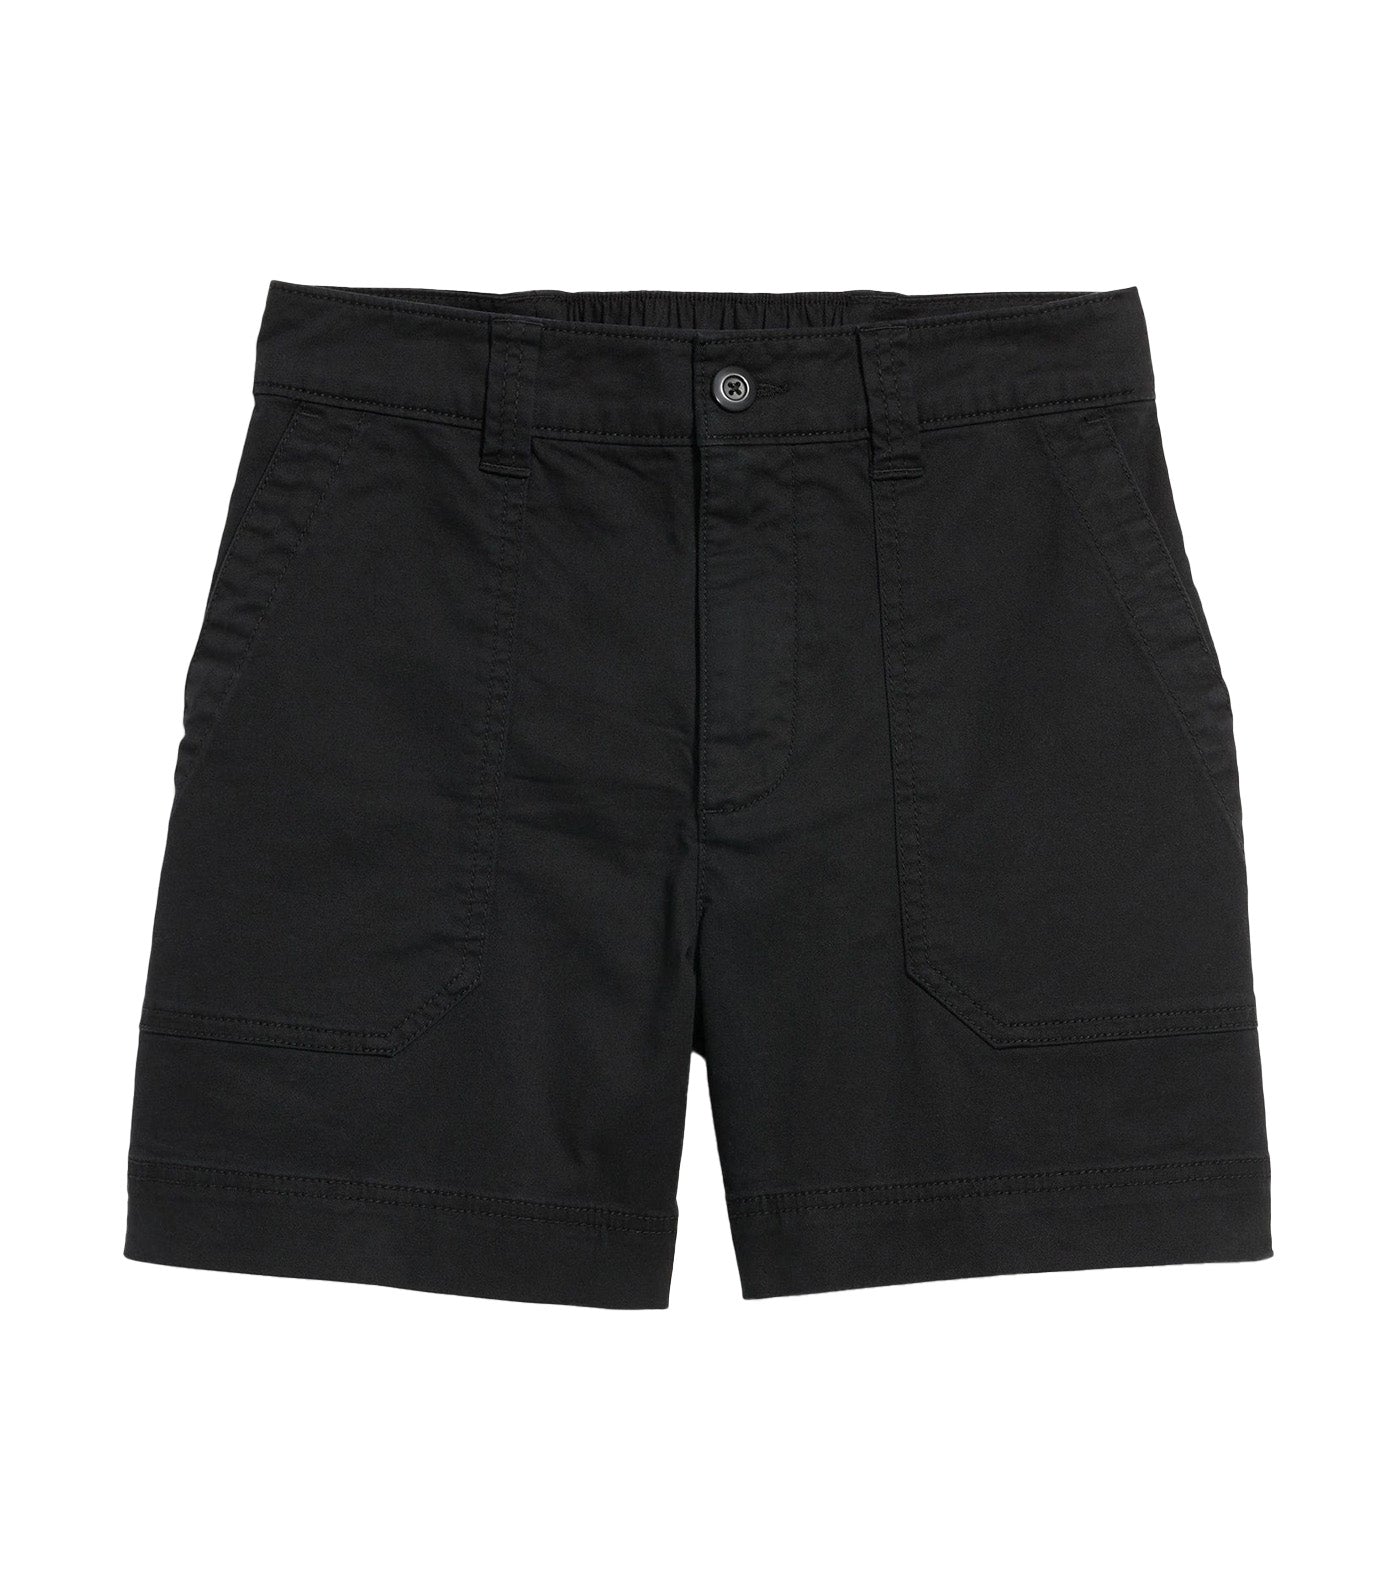 High-Waisted OGC Utility Chino Shorts for Women 5-Inch Inseam Black Jack